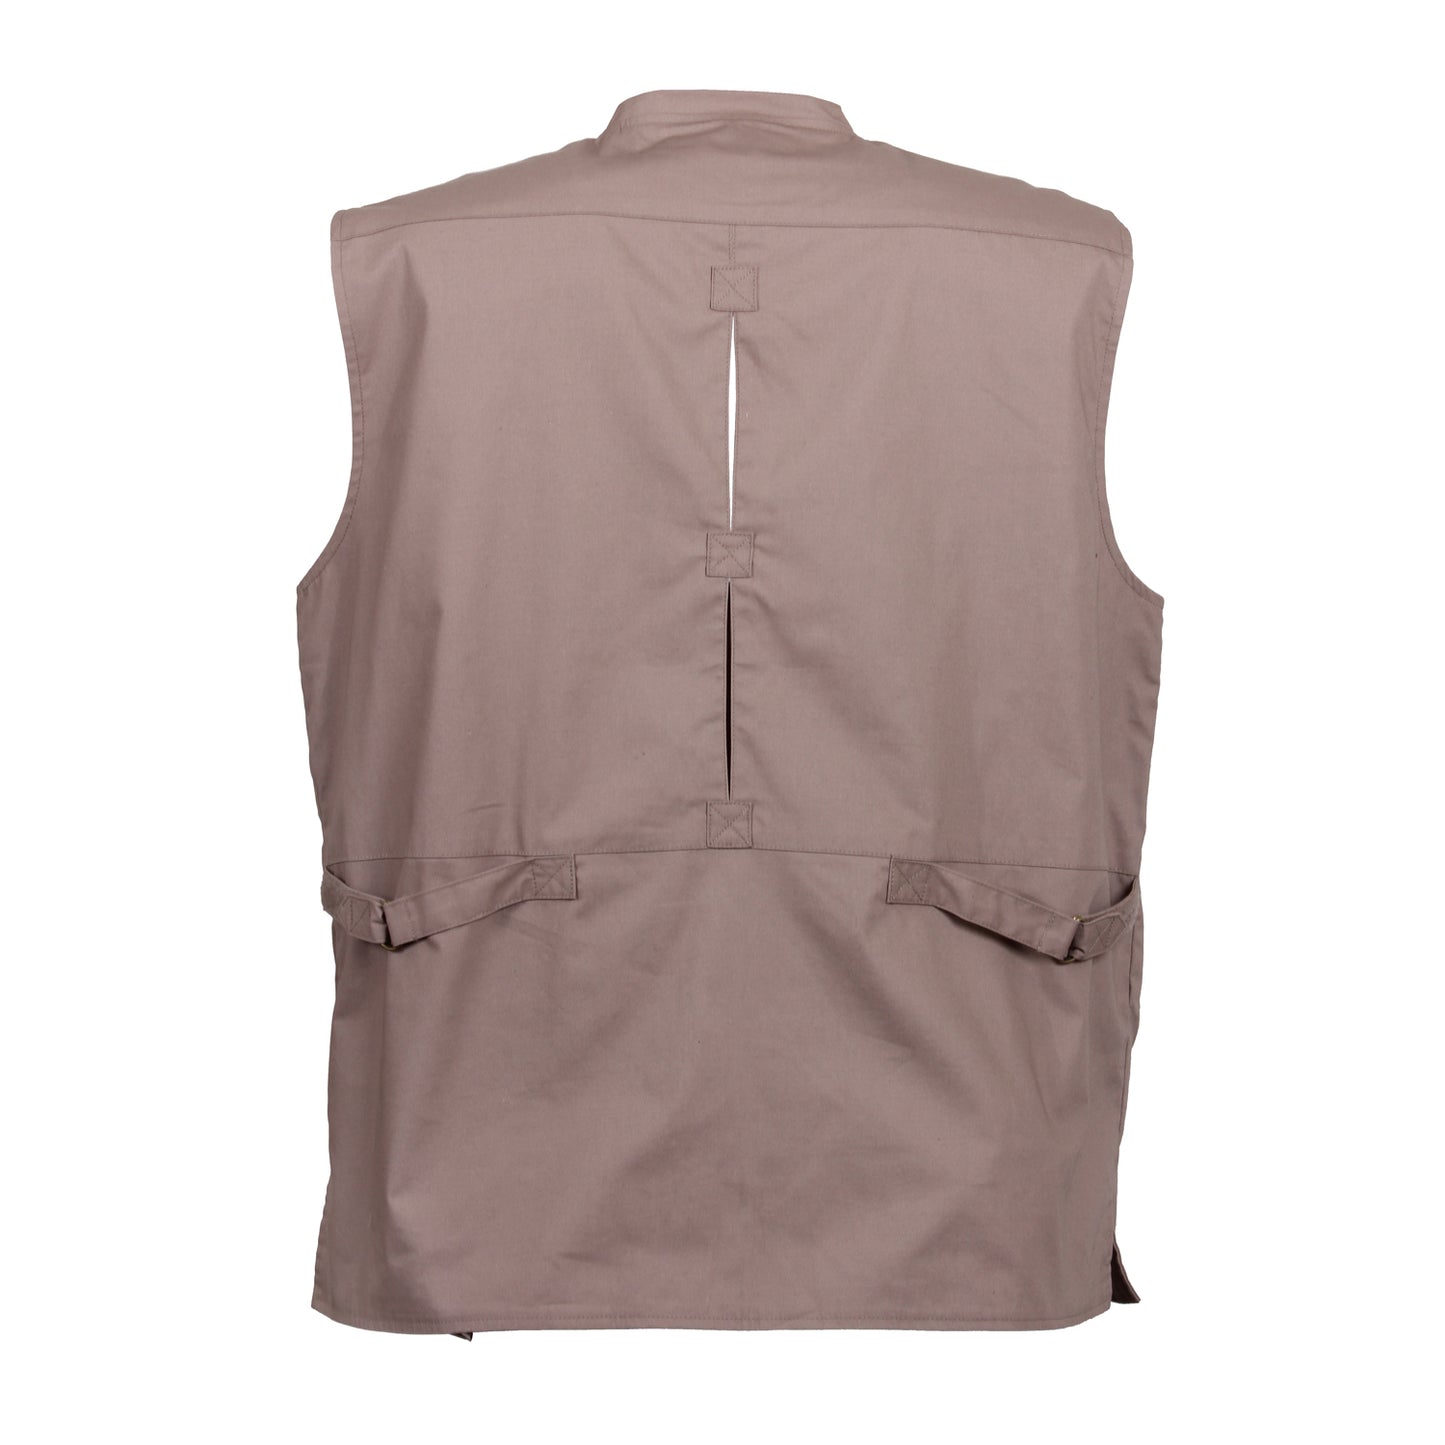 Khaki Lightweight Concealed Carry Vest - Rothco Ambidextrous CCW Tactical Vests